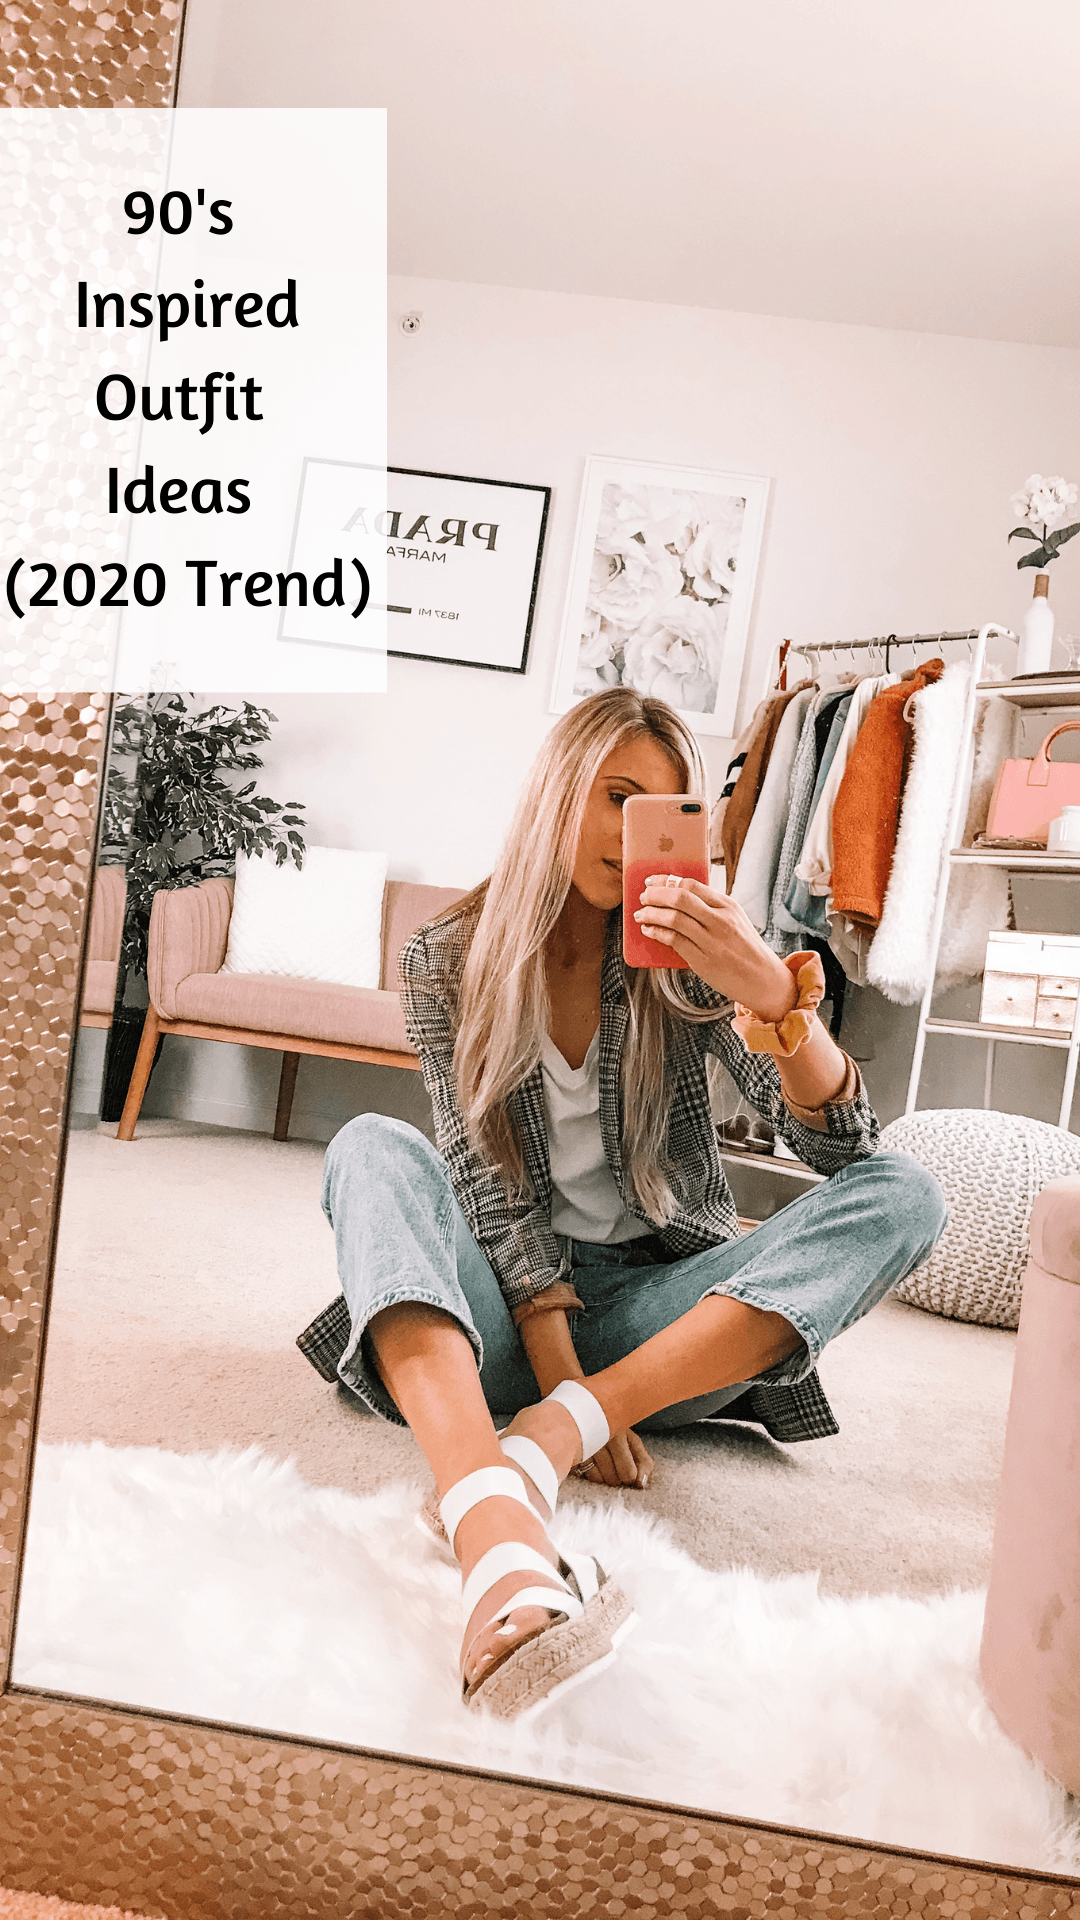 90's inspired outfit